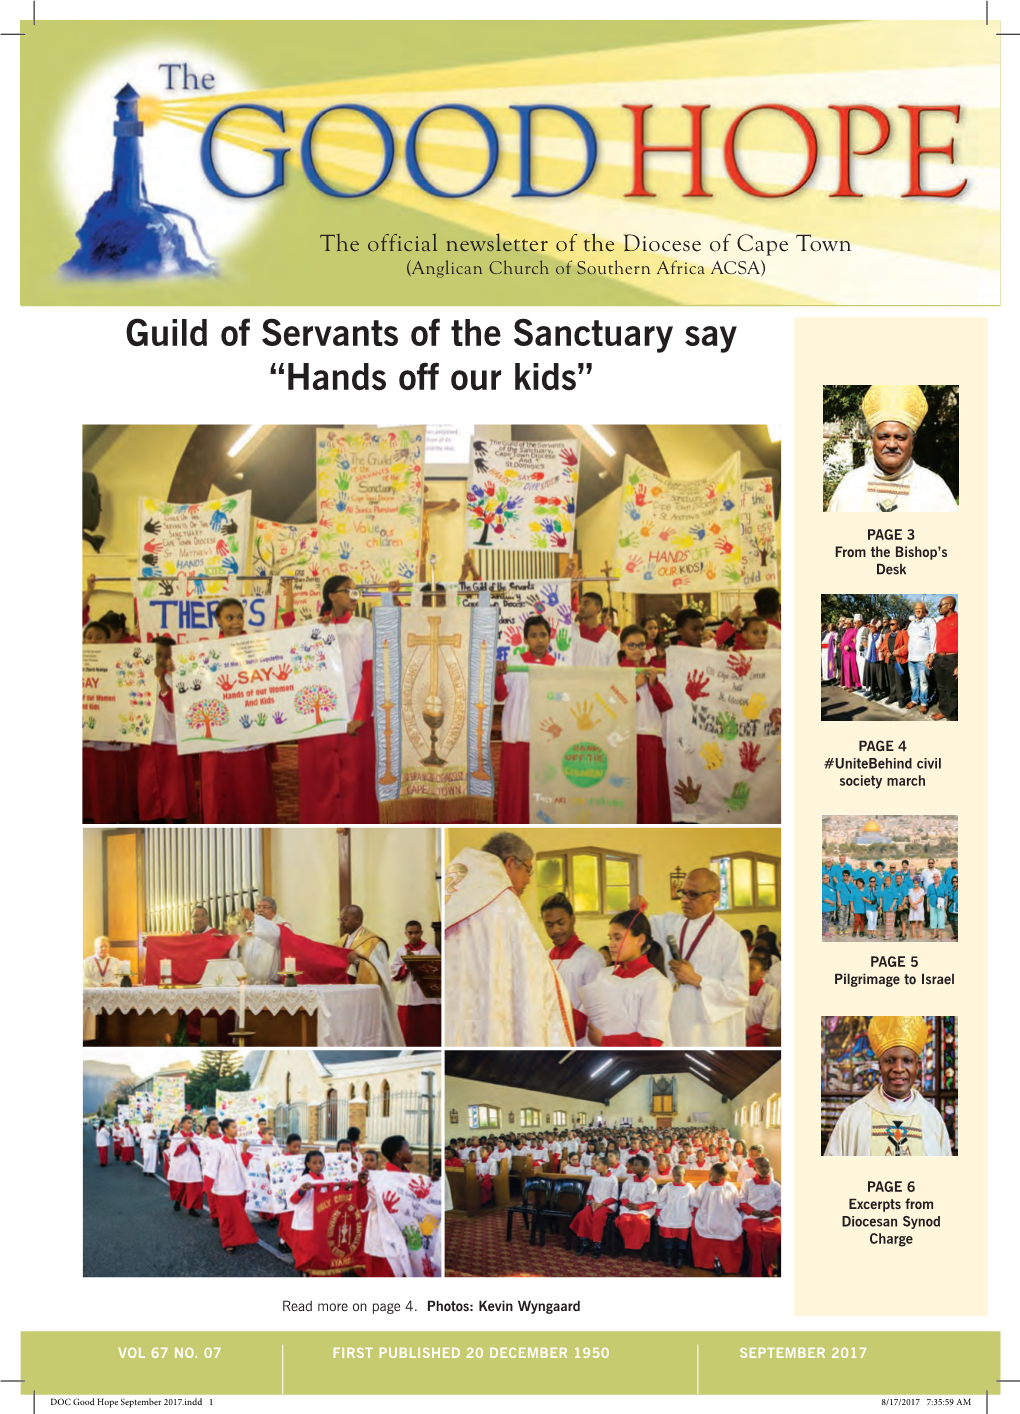 Guild of Servants of the Sanctuary Say “Hands Off Our Kids”